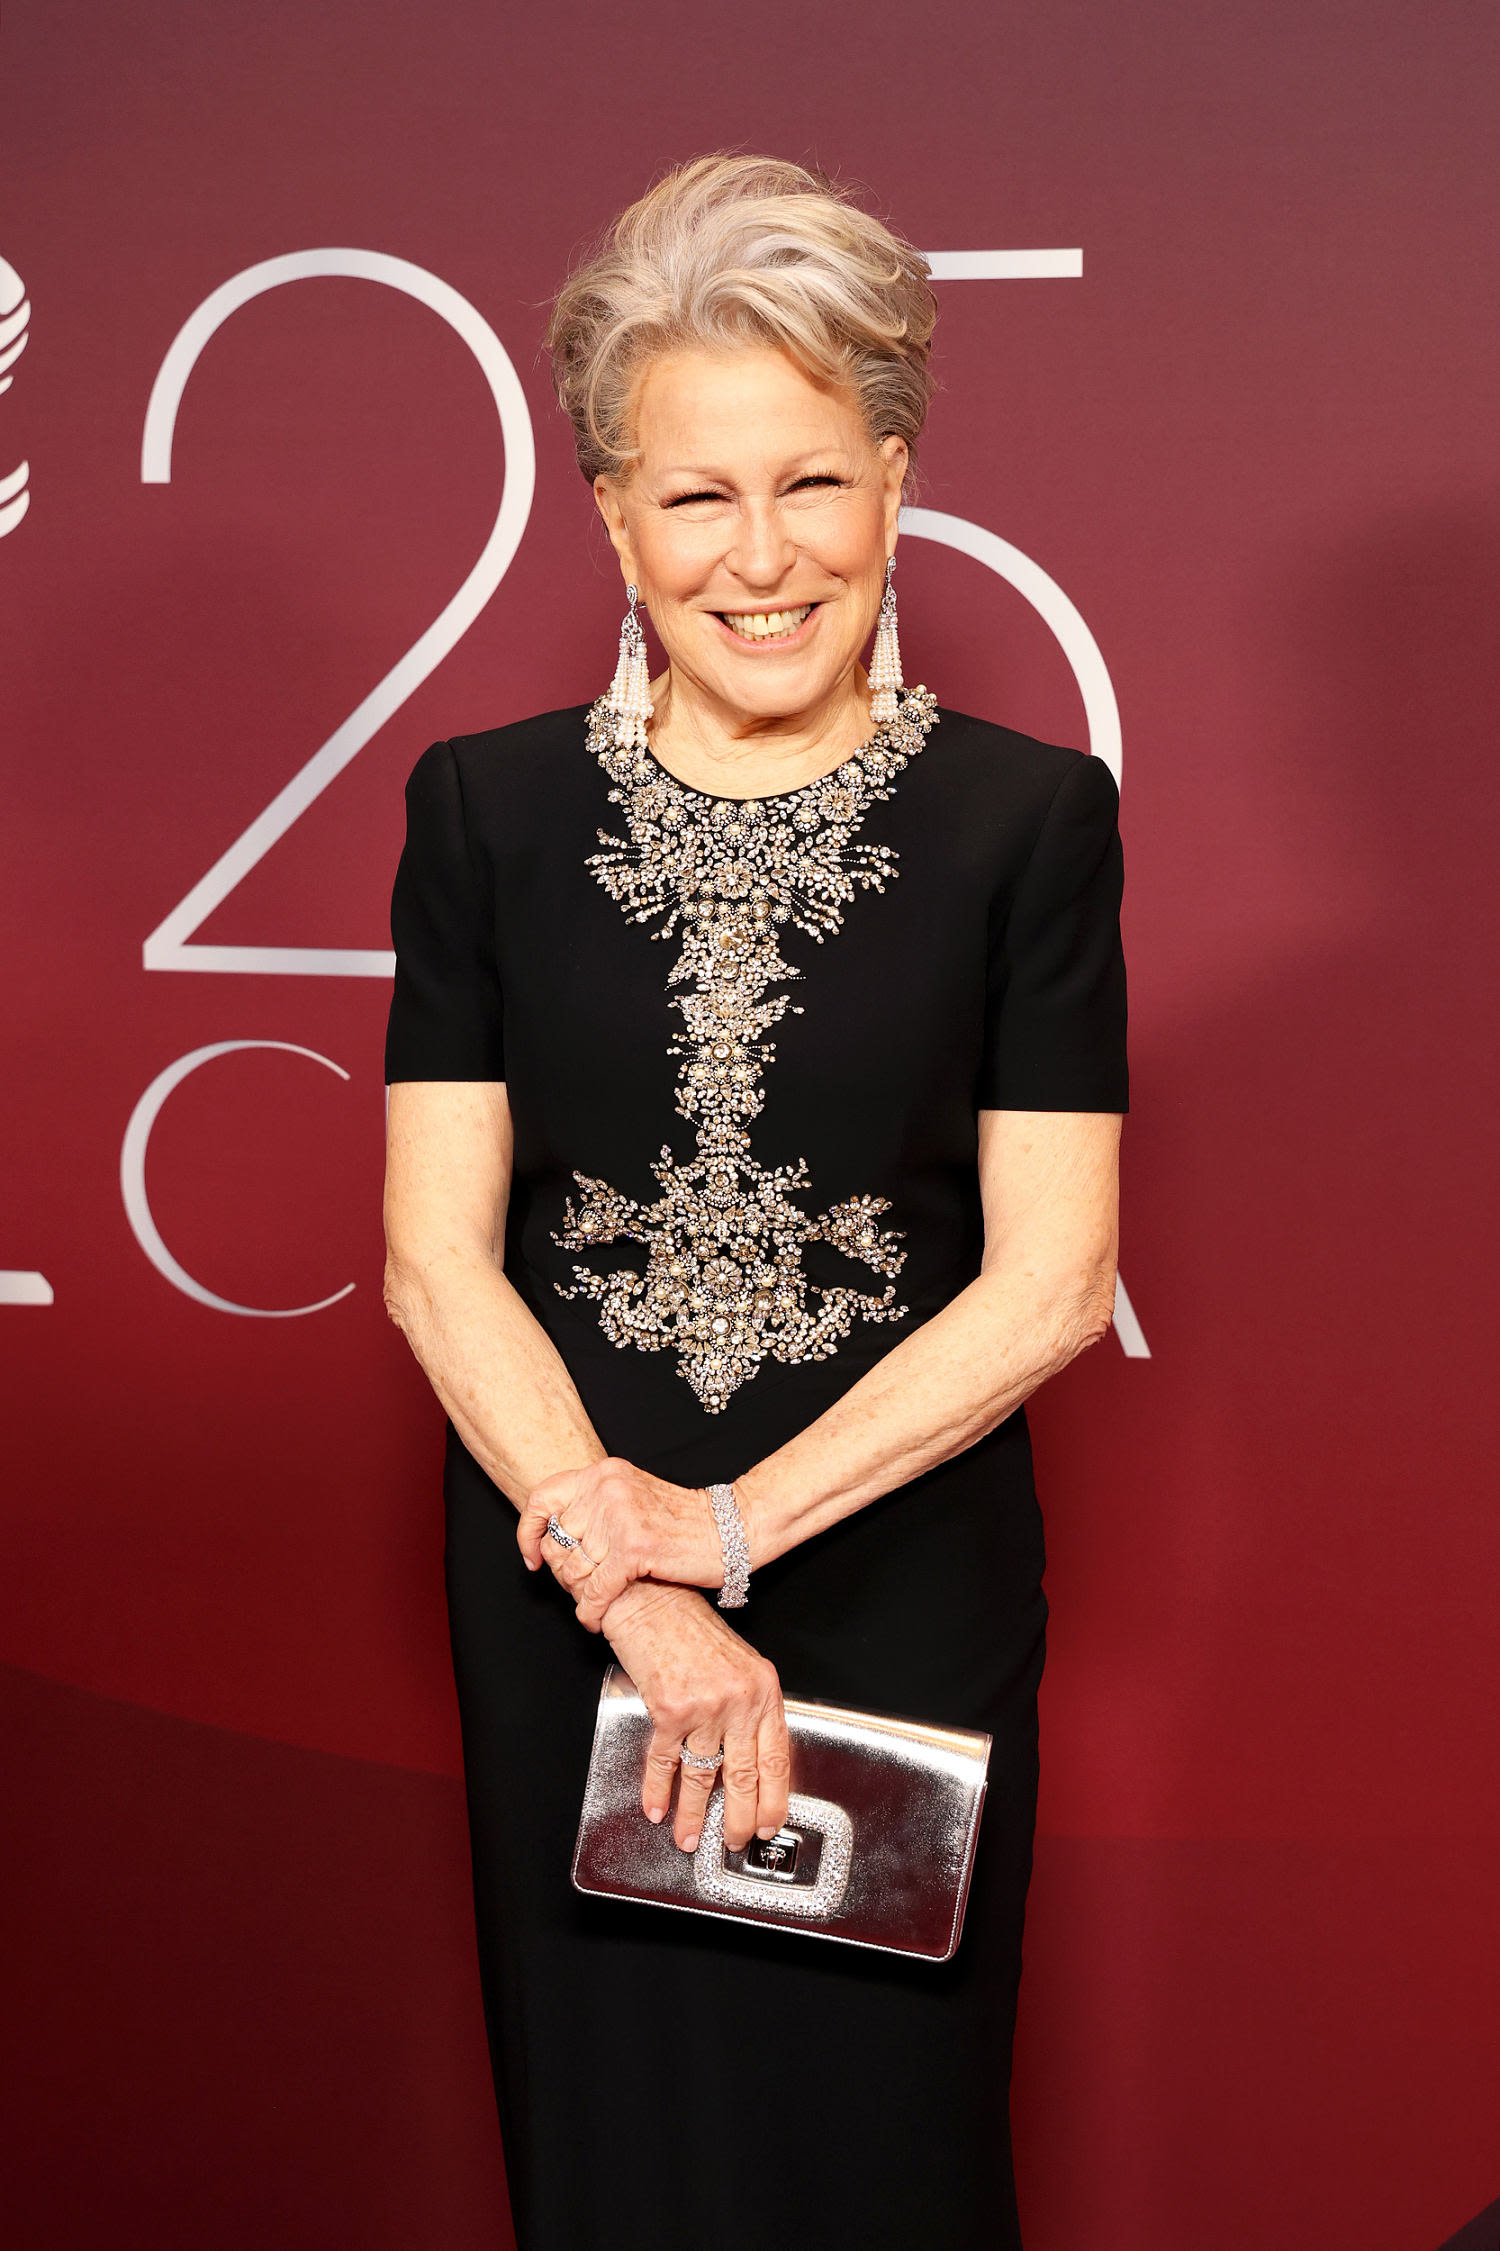 Bette Midler reveals the movie of hers she and her husband cried watching: ‘He just loved it’